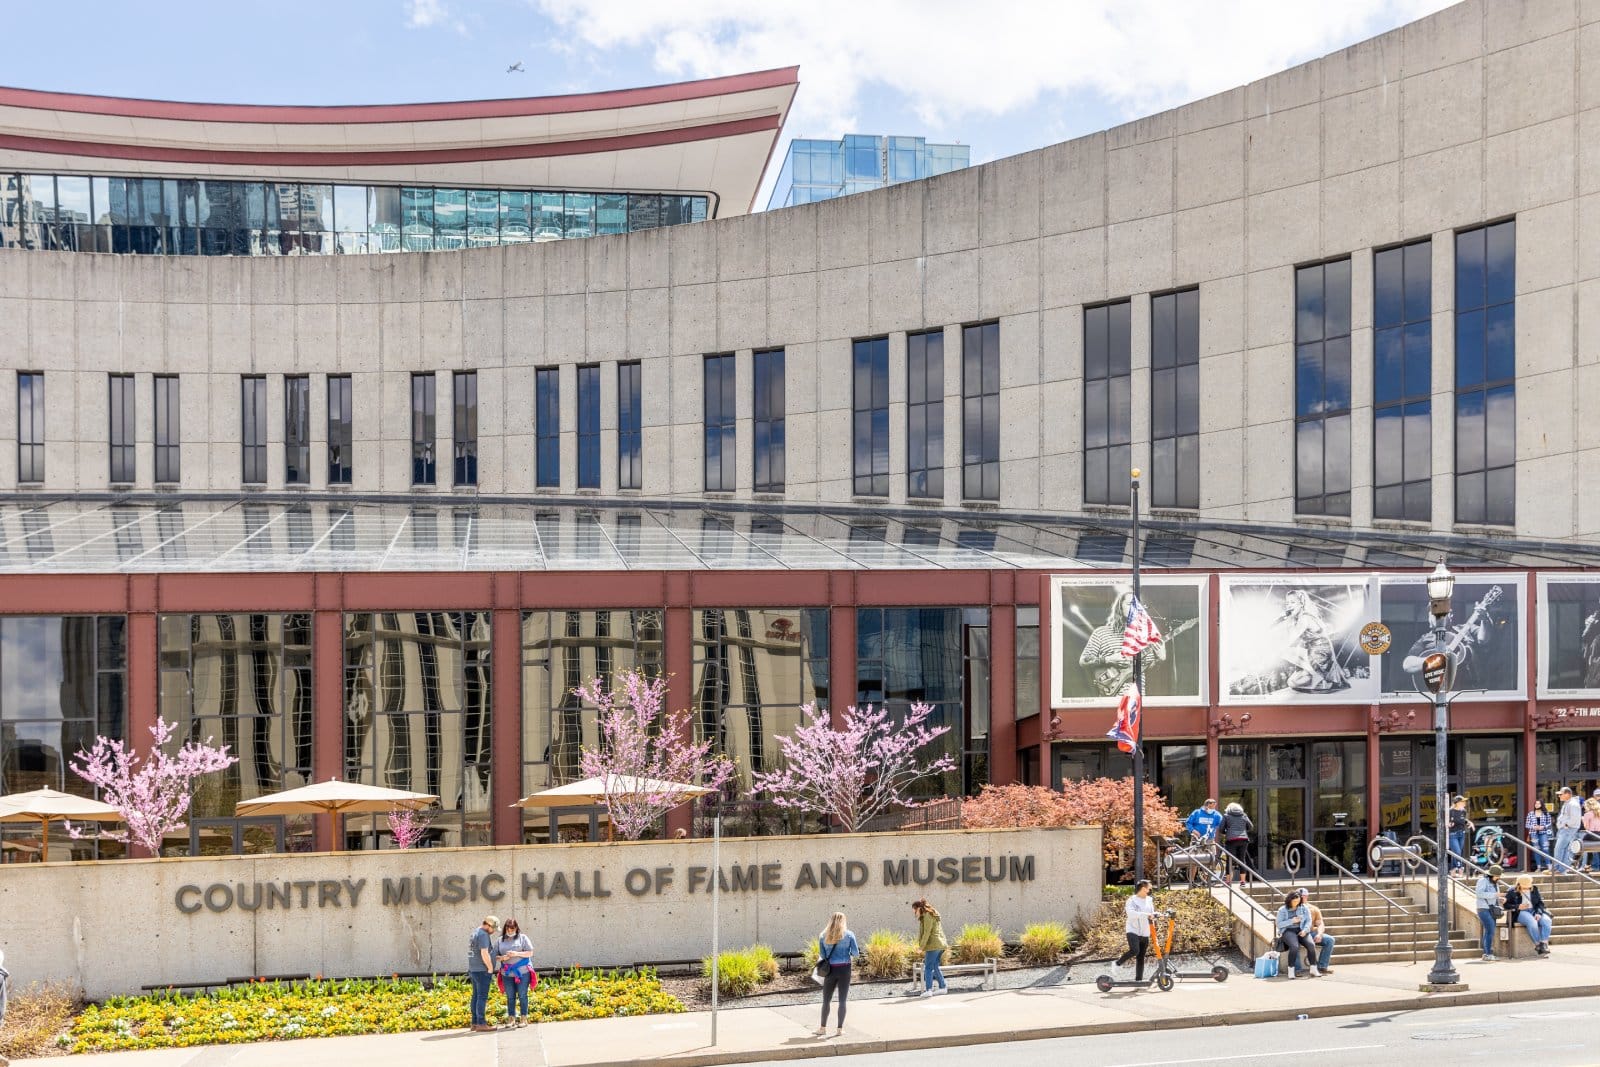 <p class="wp-caption-text">Image Credit: Shutterstock / Joseph Hendrickson</p>  <p><span>Nashville’s Country Music Hall of Fame and Museum is an expansive tribute to country music’s stars, history, and culture. With its vast collection of artifacts, photographs, and interactive exhibits, the museum offers an in-depth look at the genre’s evolution from its roots to its status as a global phenomenon.</span></p>